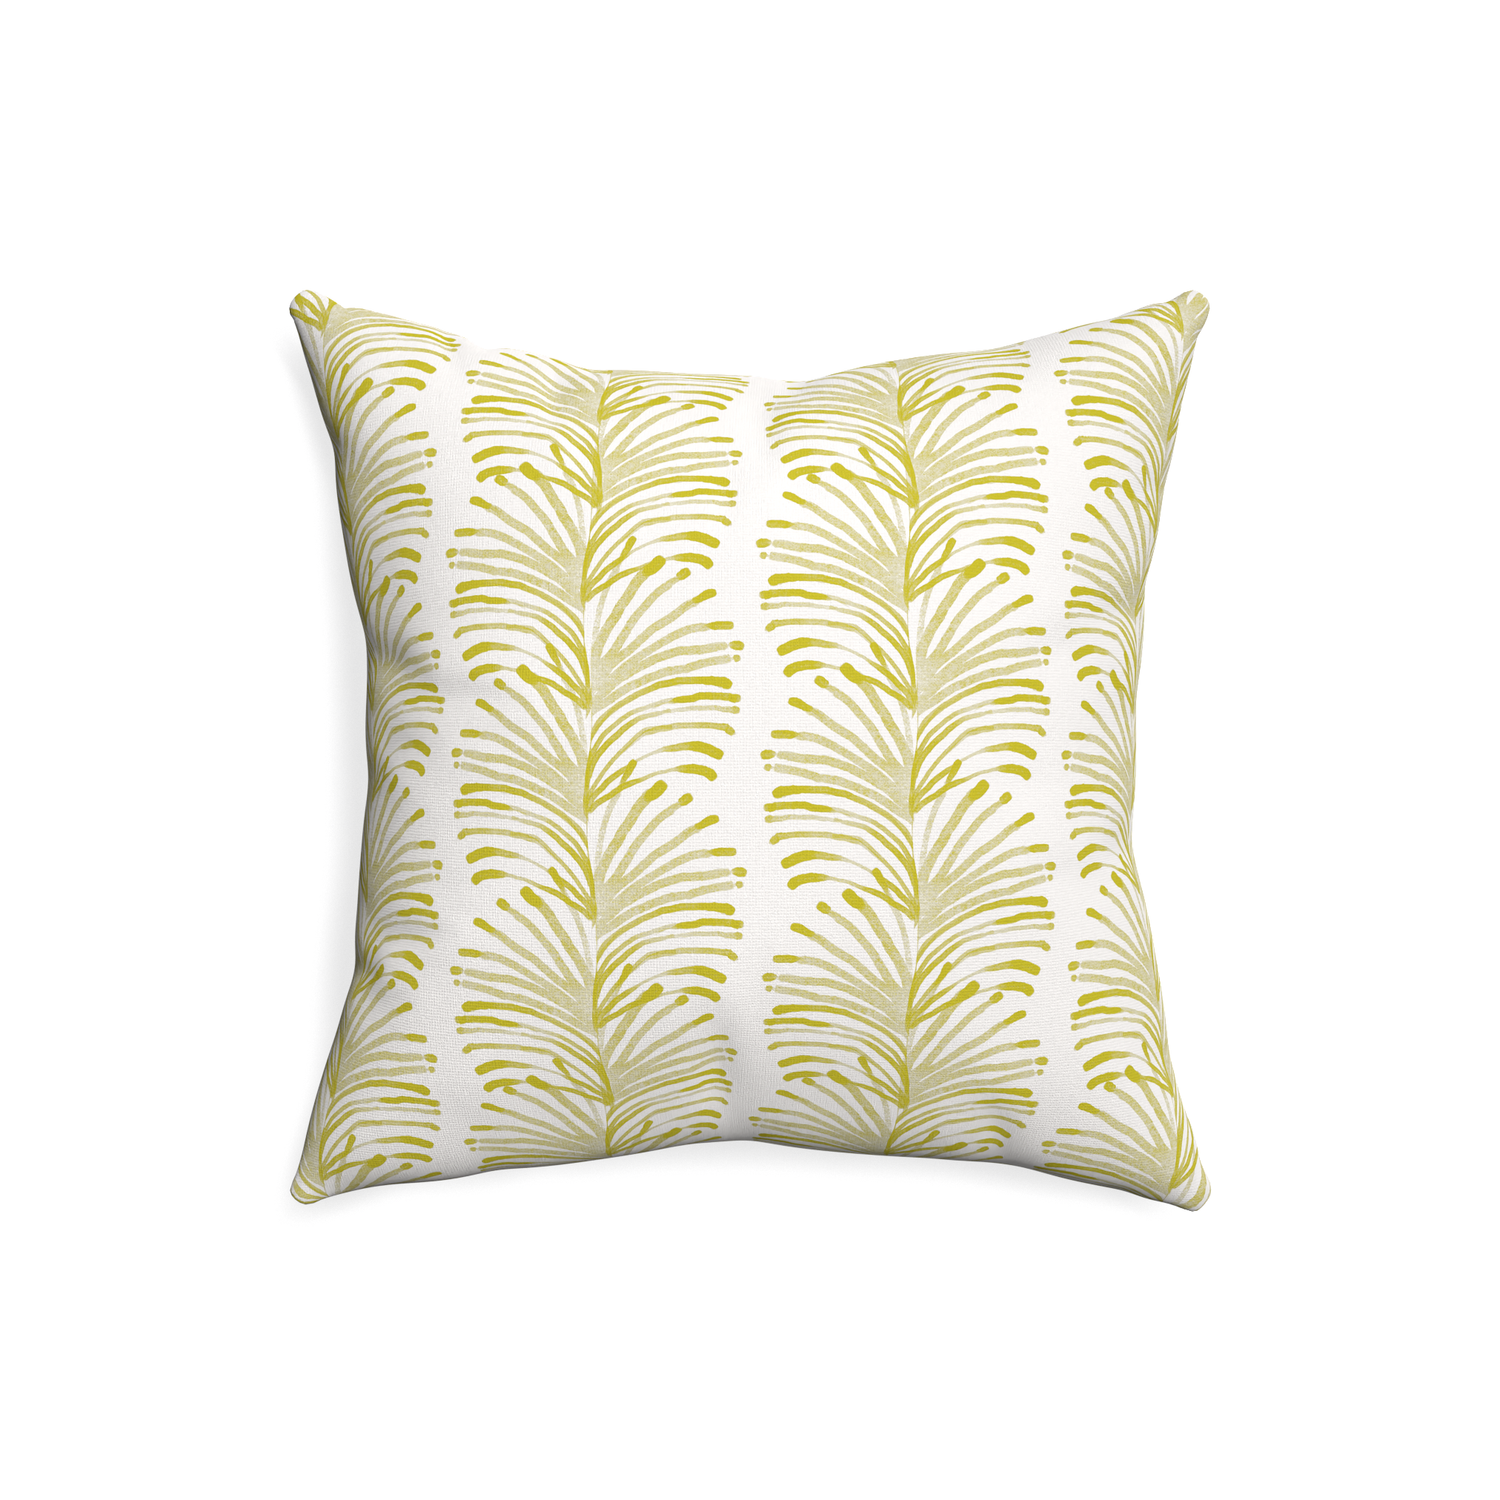 20-square emma chartreuse custom pillow with none on white background